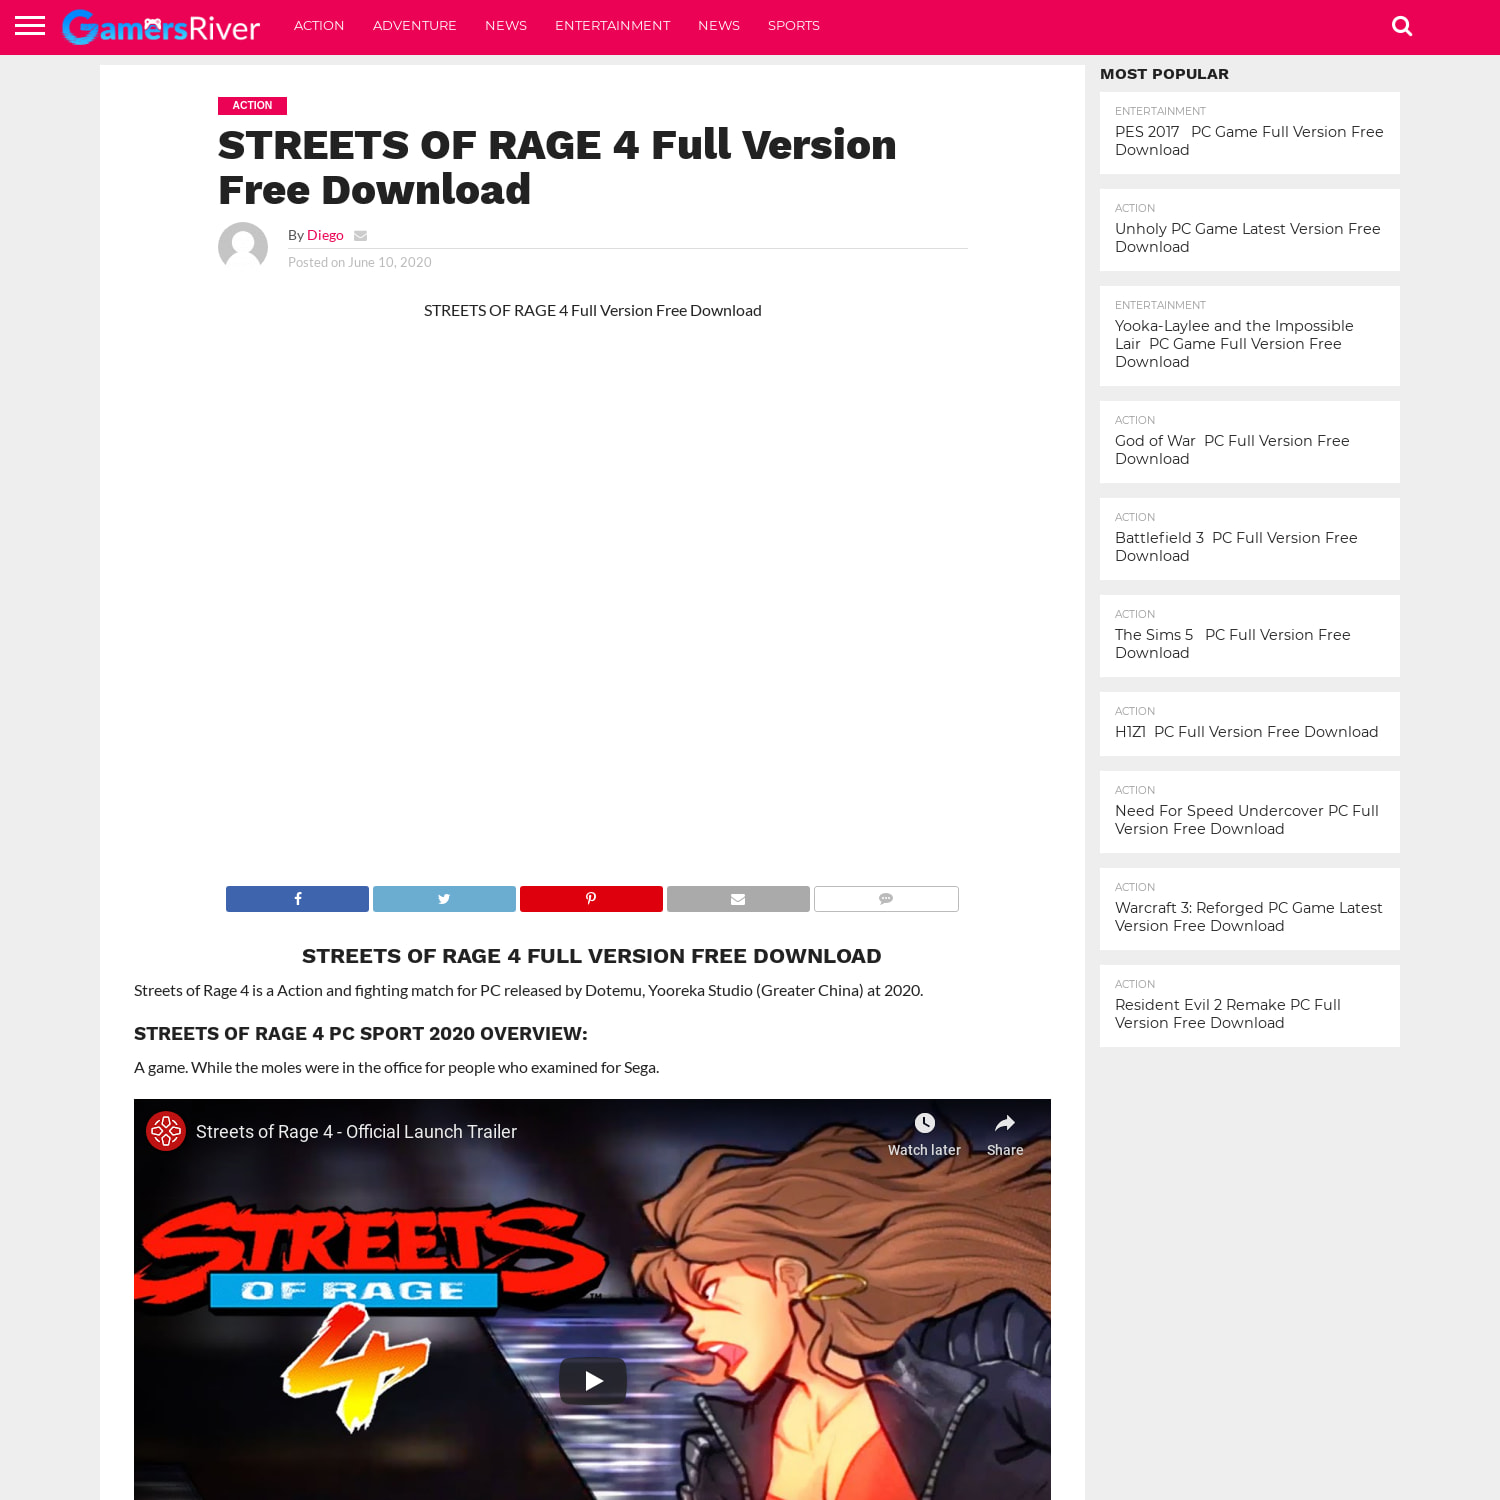 STREETS OF RAGE 4 Full Version Free Download